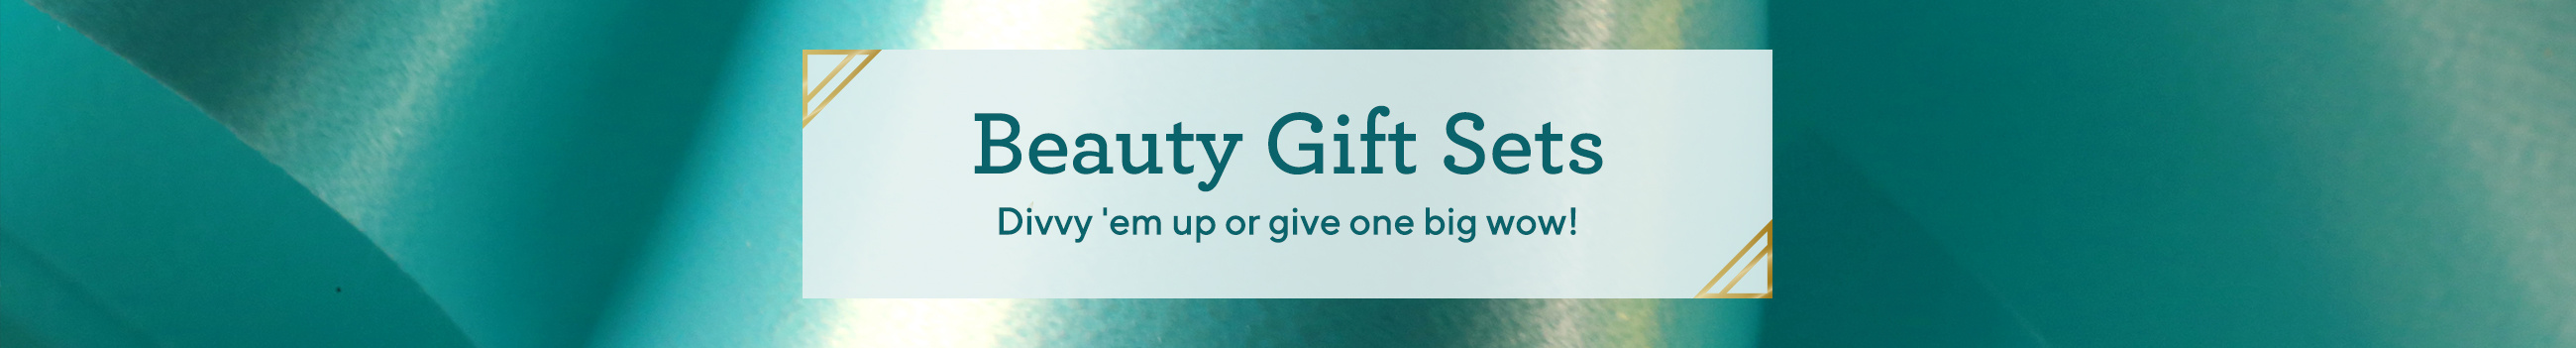 Beauty Gift Sets  Divvy 'em up or give one big wow!